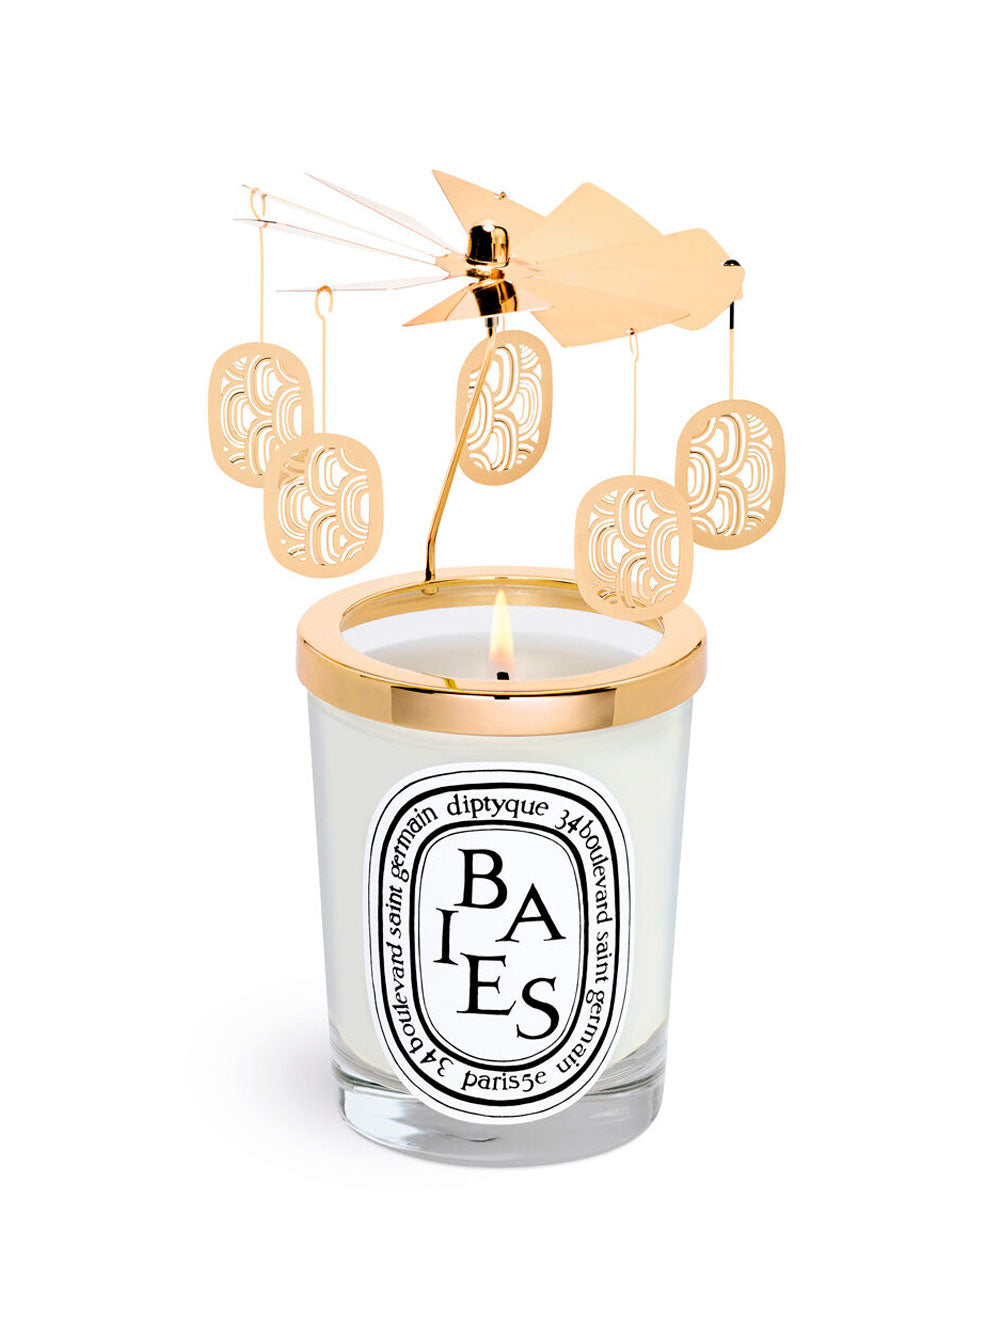 Carousel Set with Baies 190g Candle - Ltd. Edition